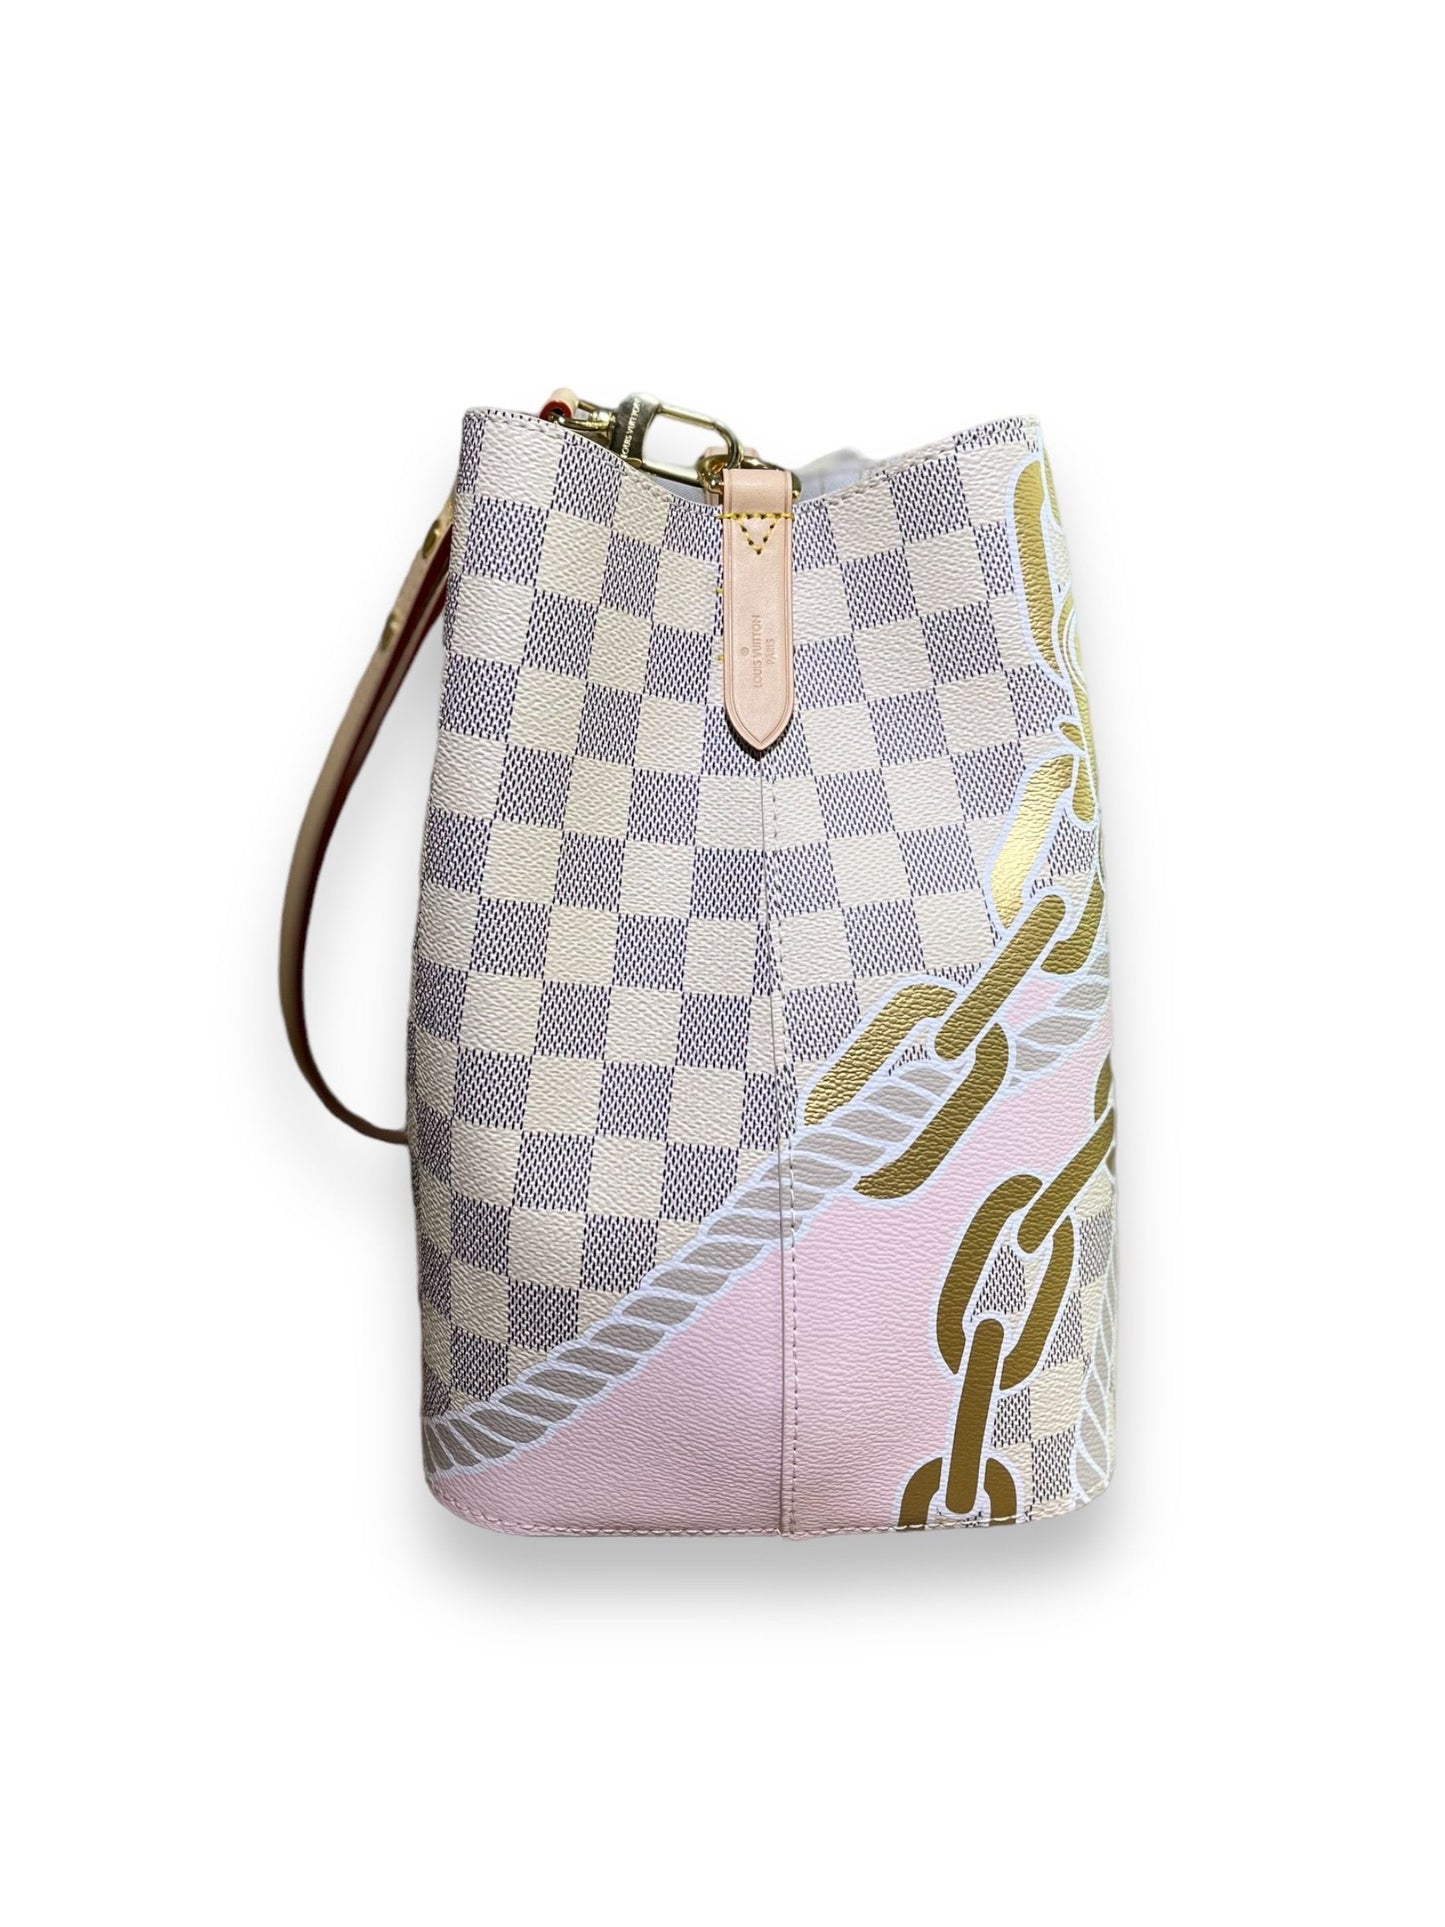 Sold at Auction: Louis Vuitton Damier Azur Tahiti NeoNoe Shoulder Bag.  Damier Azur Tahiti Canvas. Made in France. Comes With Shoulder Strap 112cm.  And a Certificate of Authenticity. Bag Size: W 13cm